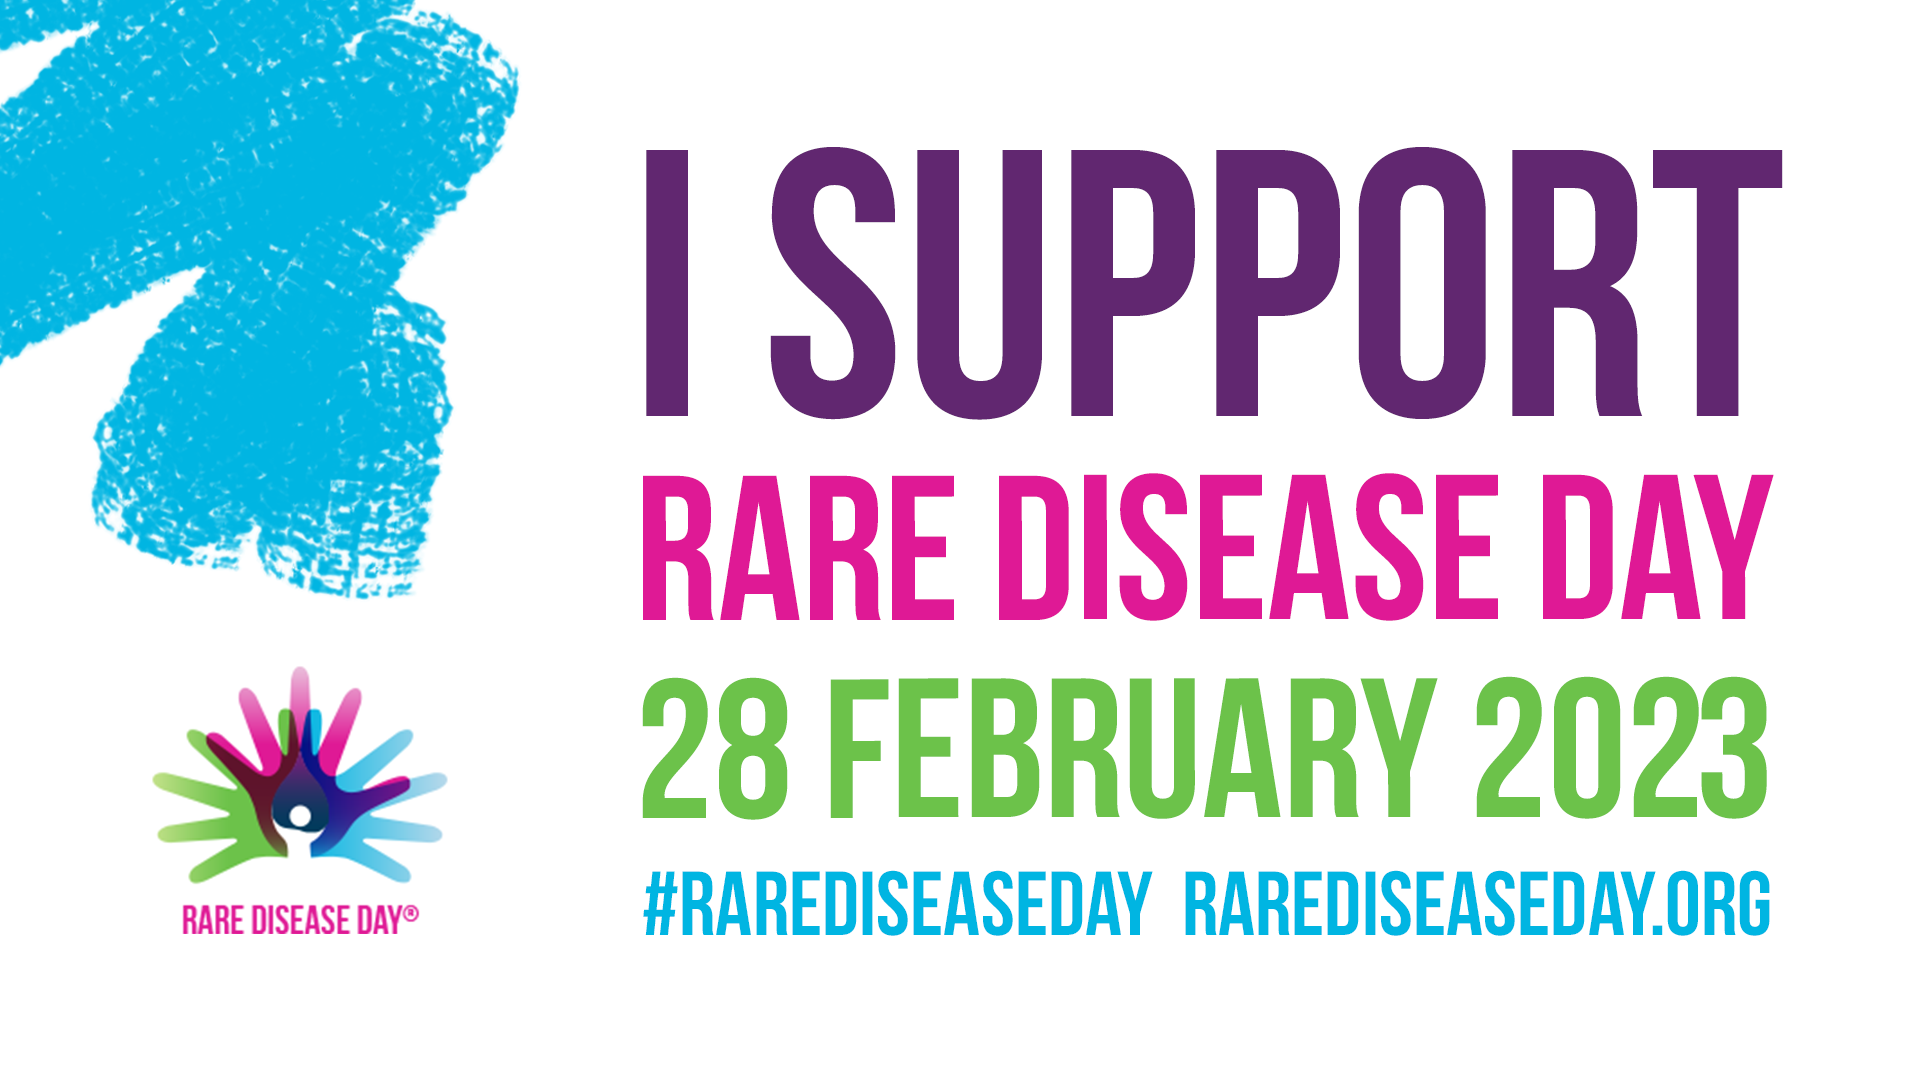 Rare Disease Day graphic with text: "I Support Rare Disease Day - 28 February 2023 - #RareDiseaseDay - RareDiseaseDay.org